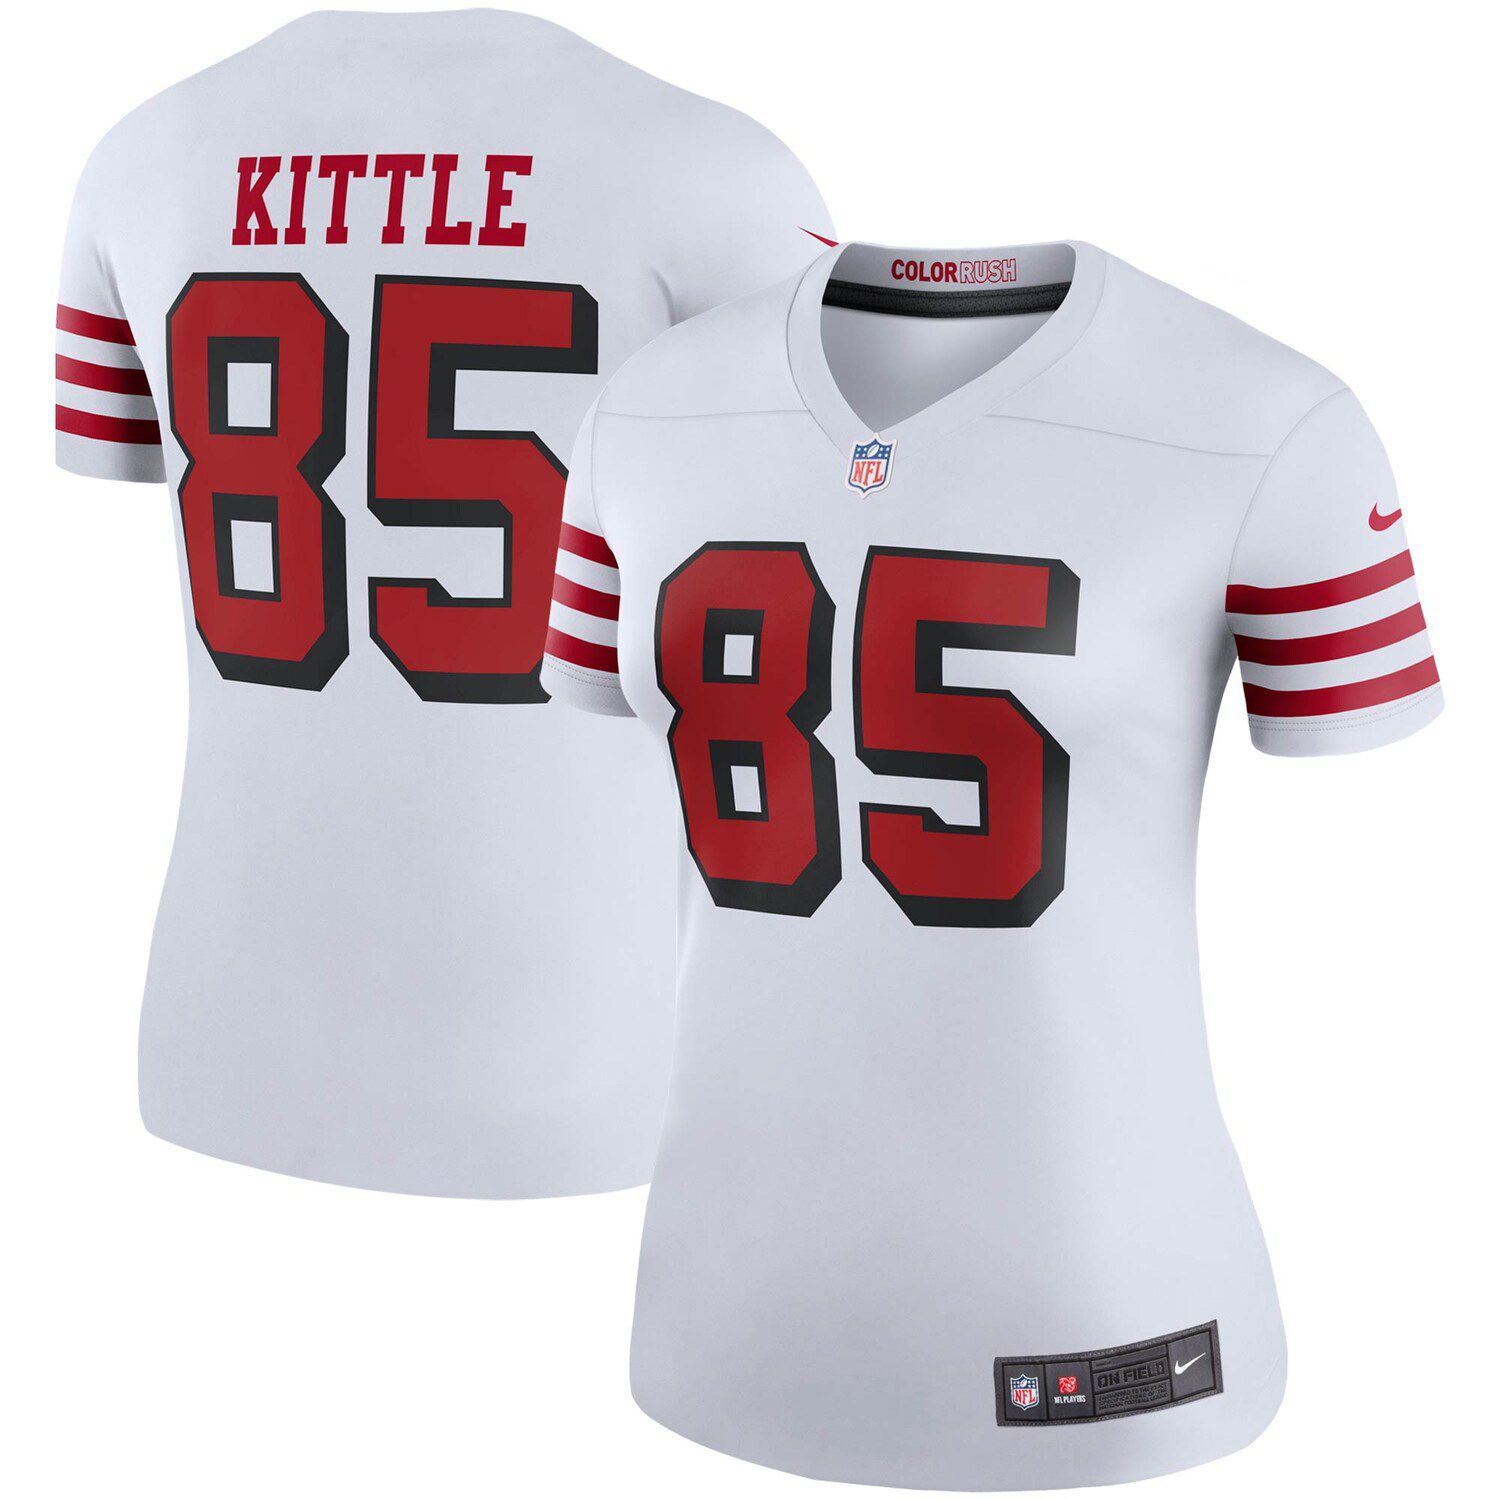 49ers color rush white